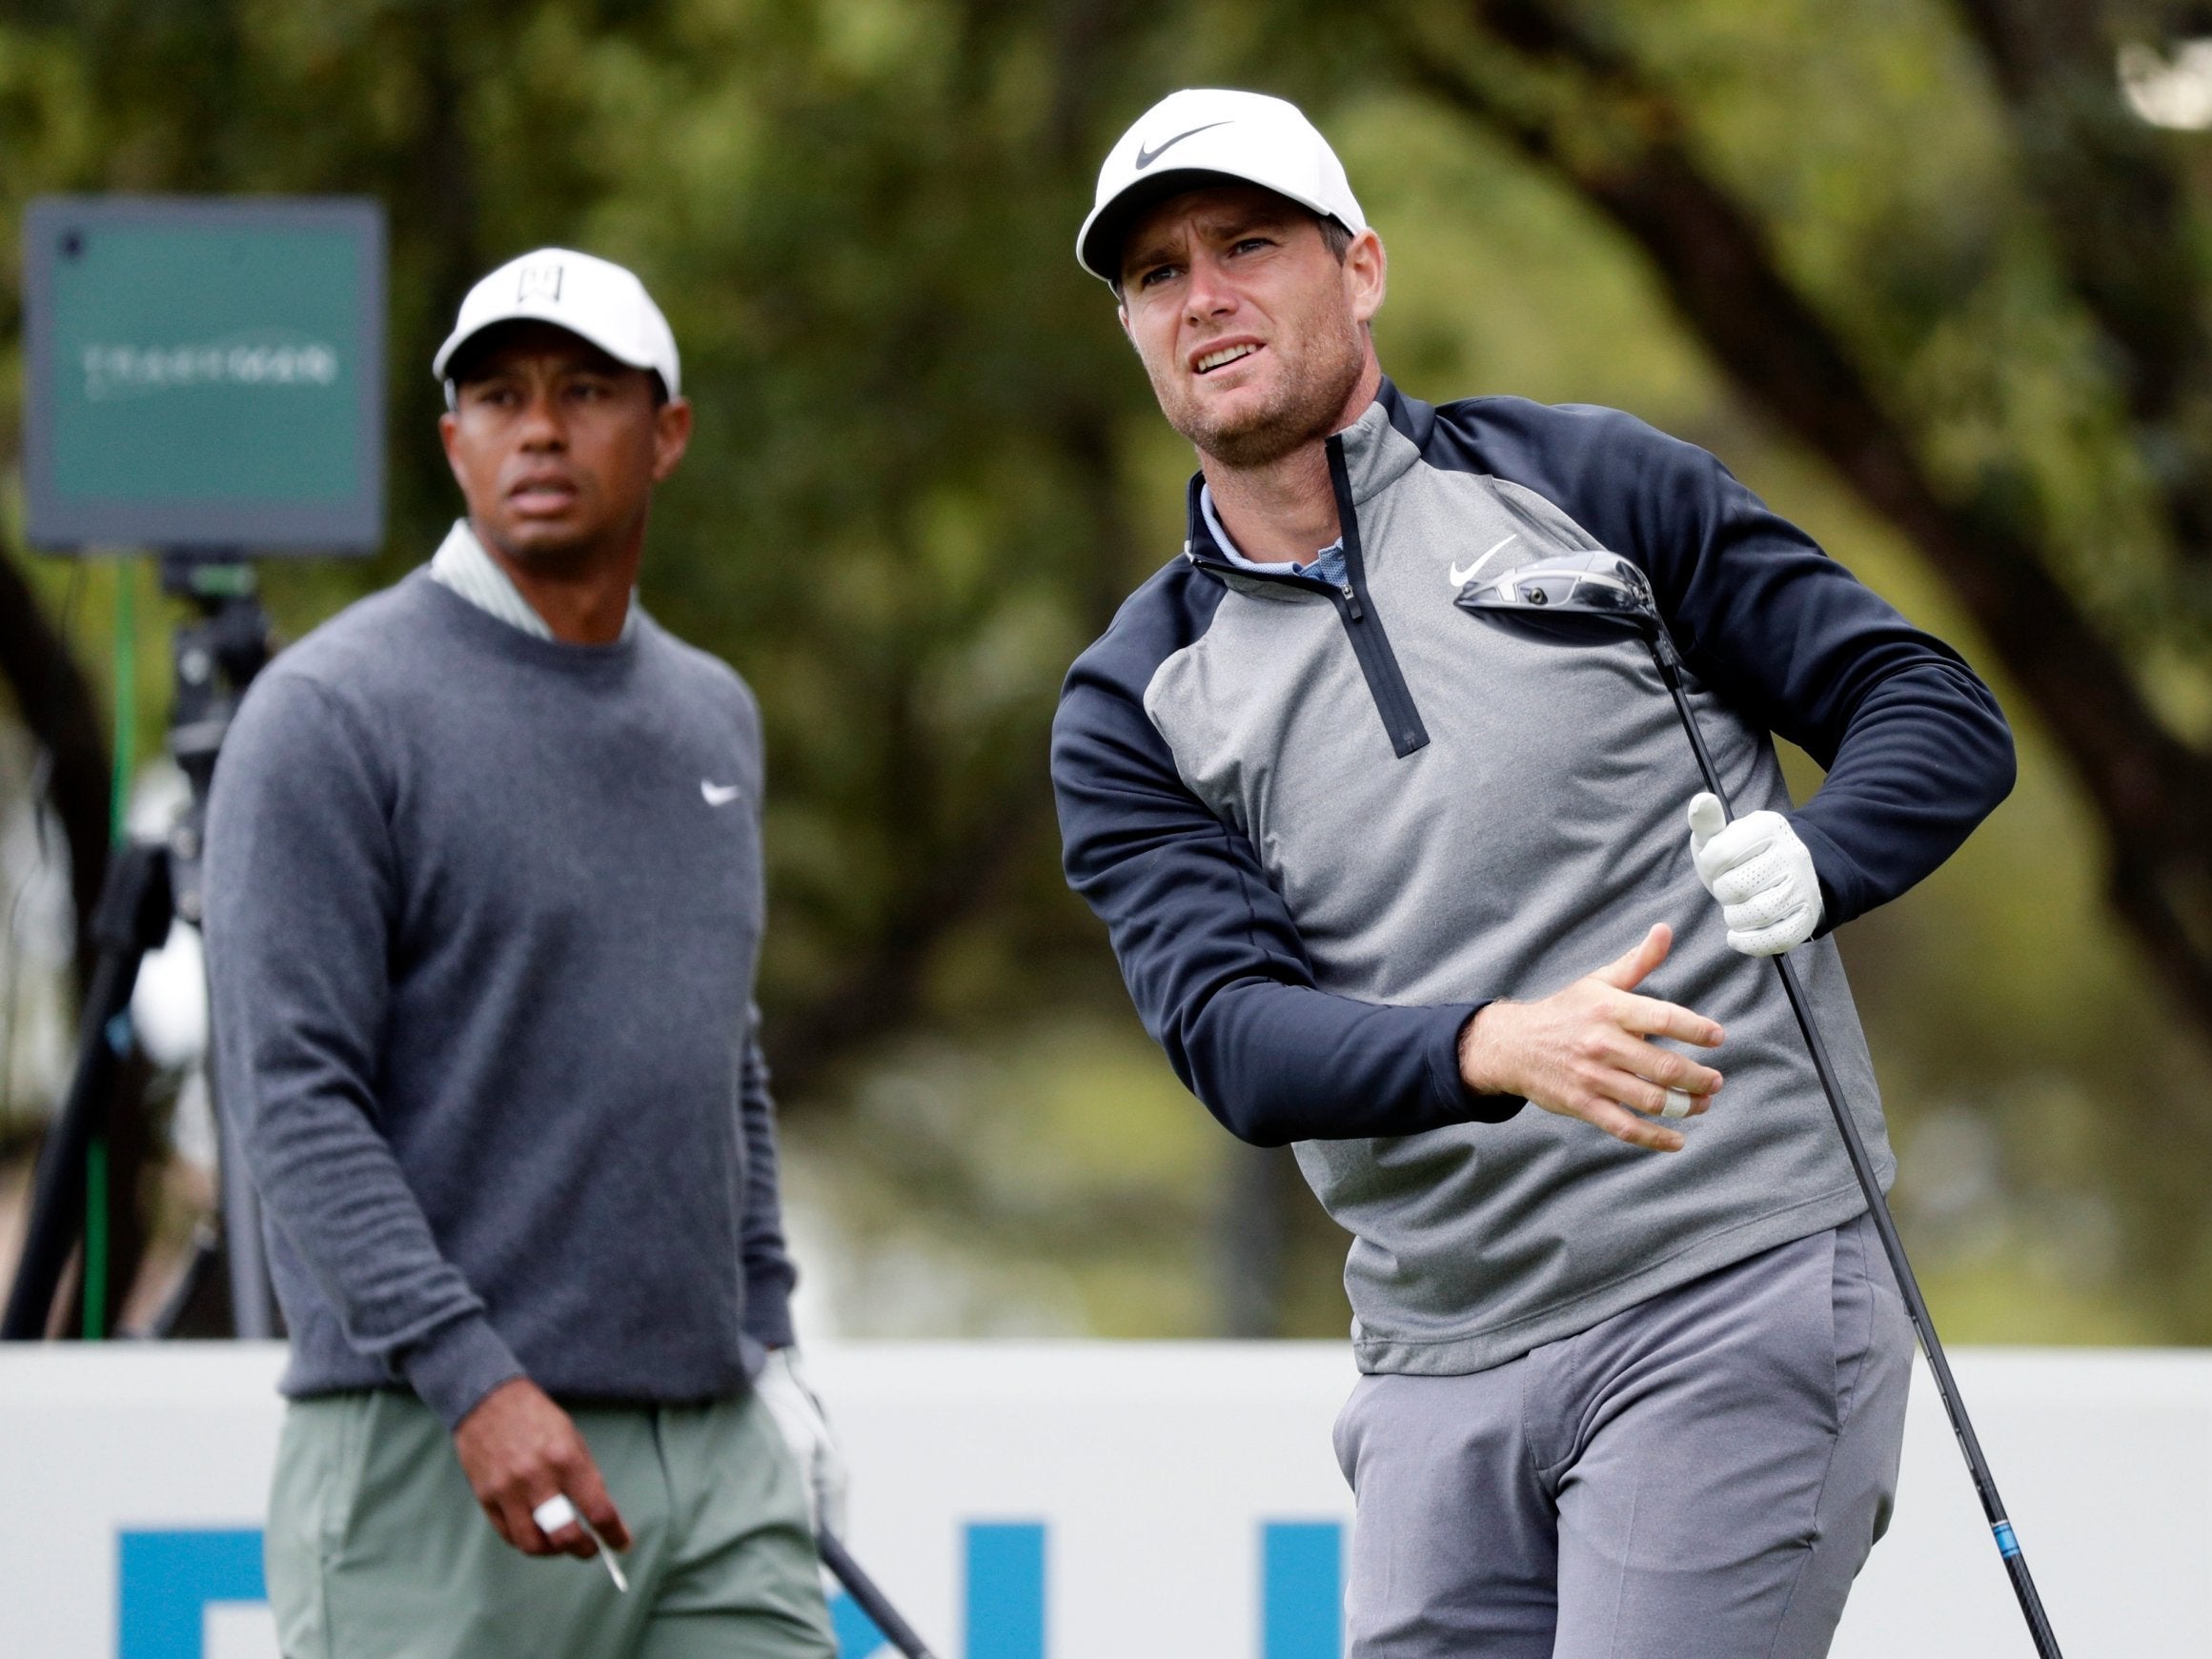 Lucas Bjerregaard, right, watches his drive on the eighth hole as Tiger Woods, left, looks on